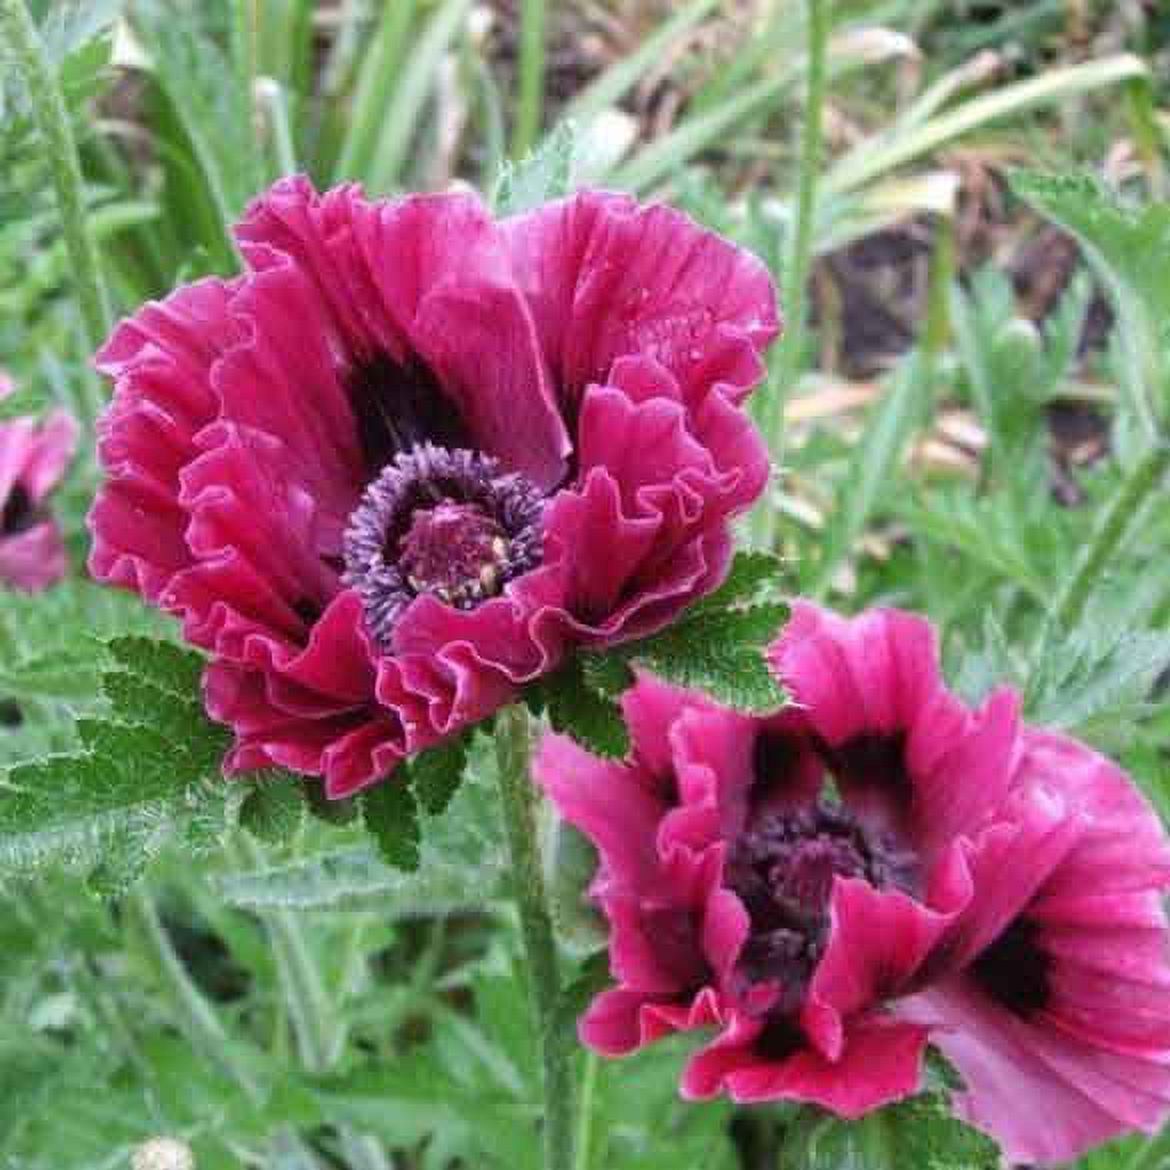 Papaver orientale Roots - Harlem - 10 Roots - Red Flower Bulbs,  Root  Attracts Butterflies, Attracts Pollinators, Easy to Grow & Maintain, Container Garden - image 3 of 4